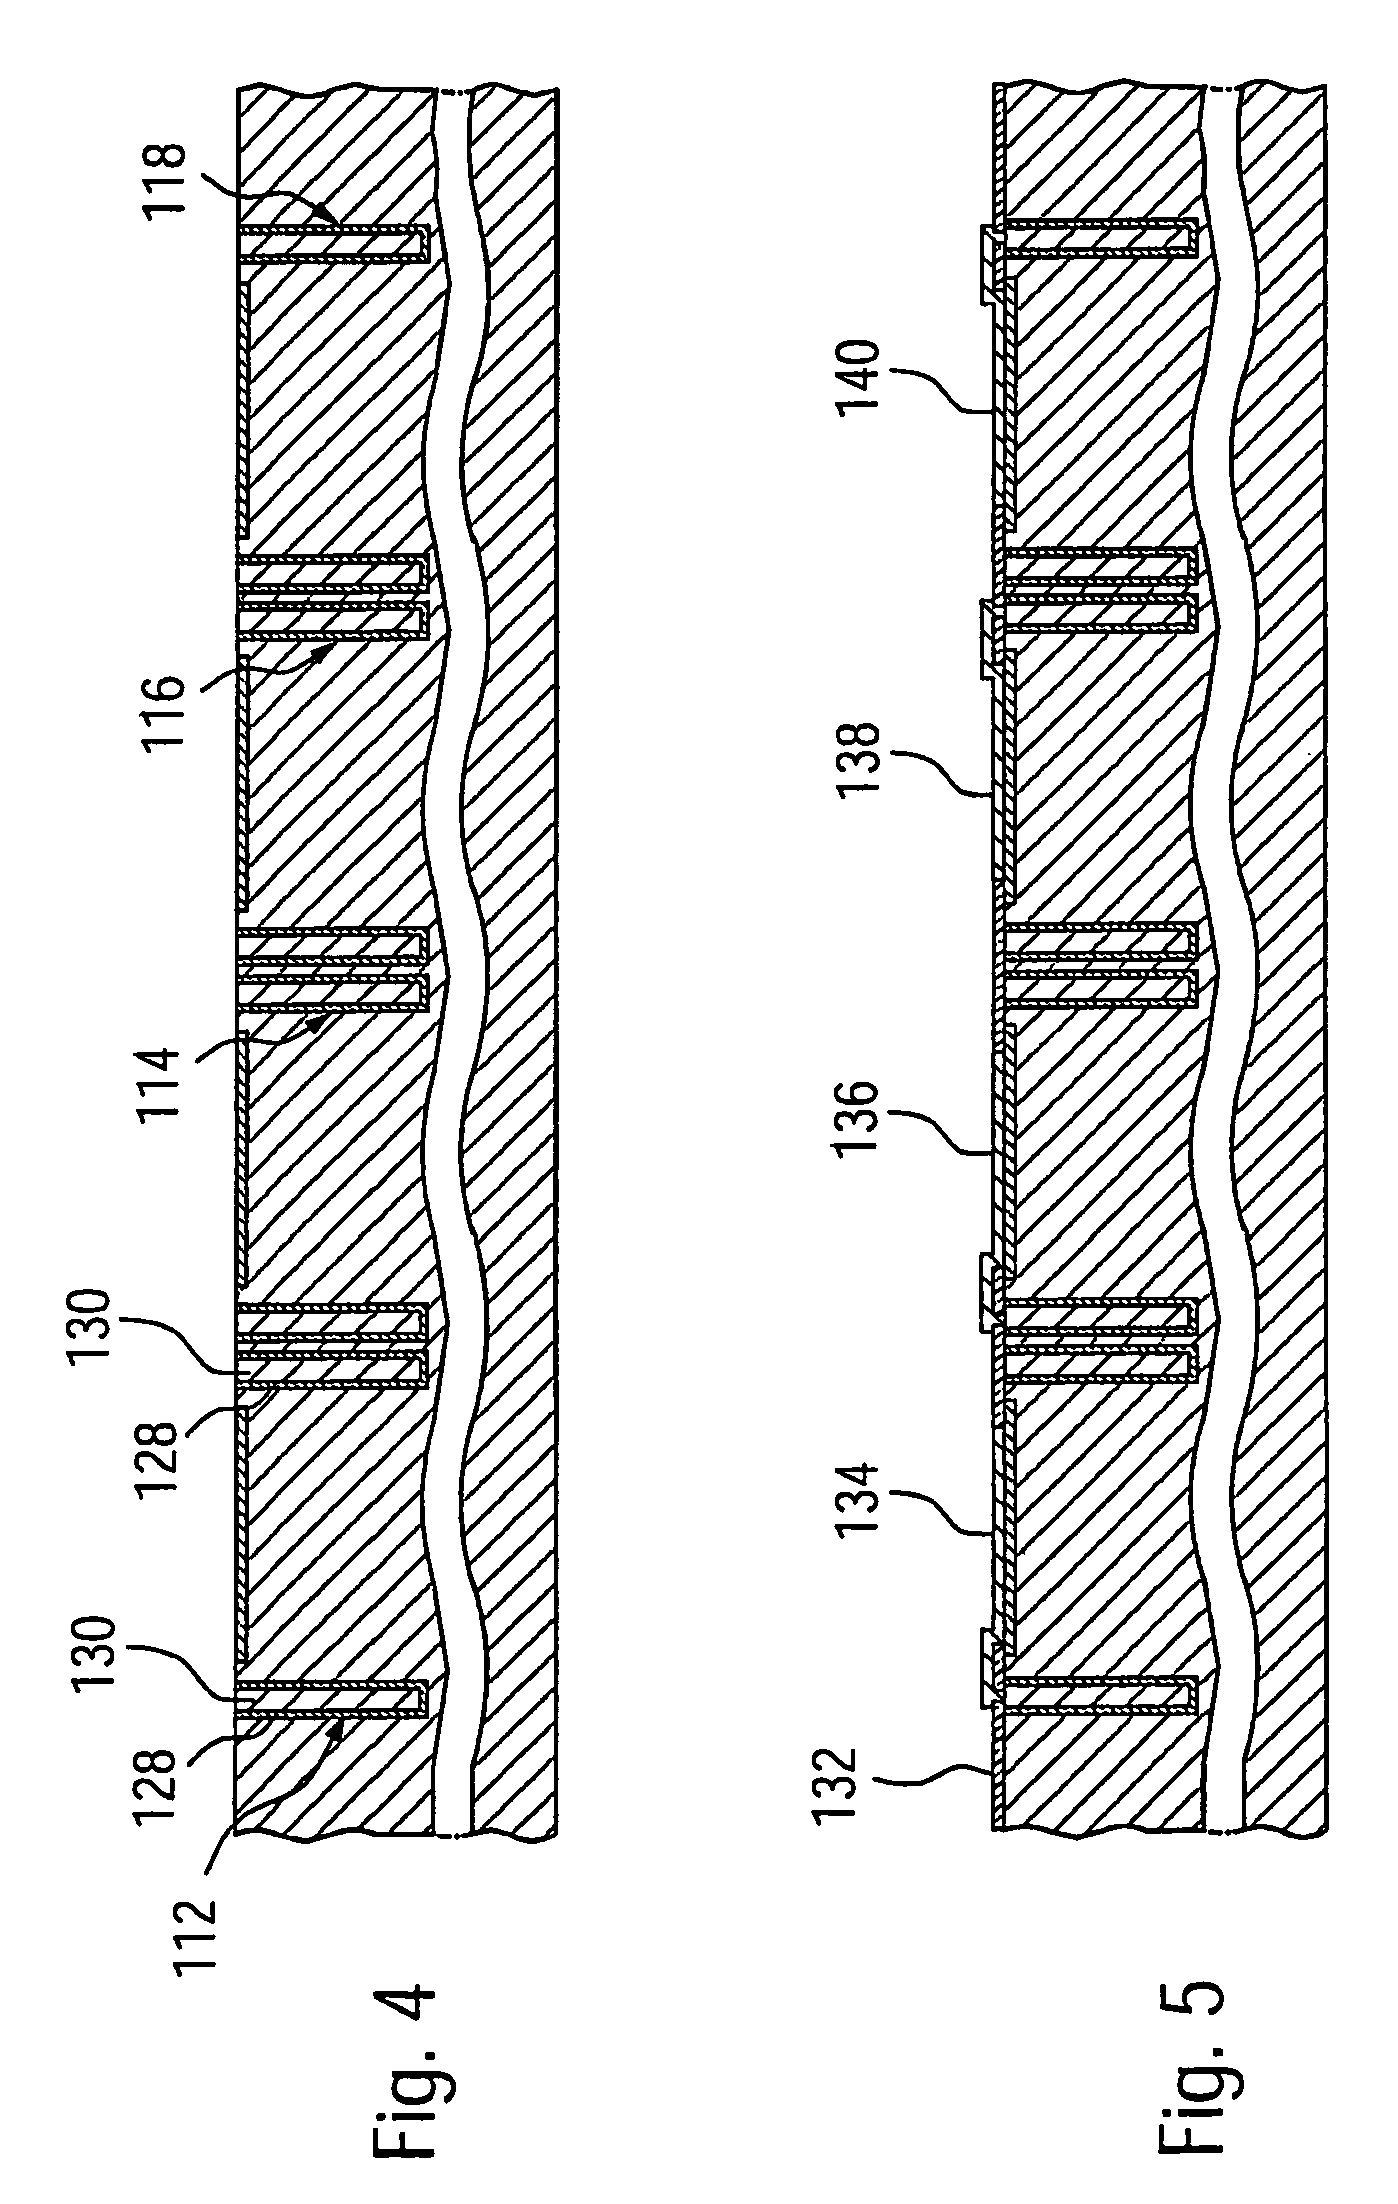 Semiconductor device with improved ESD protection